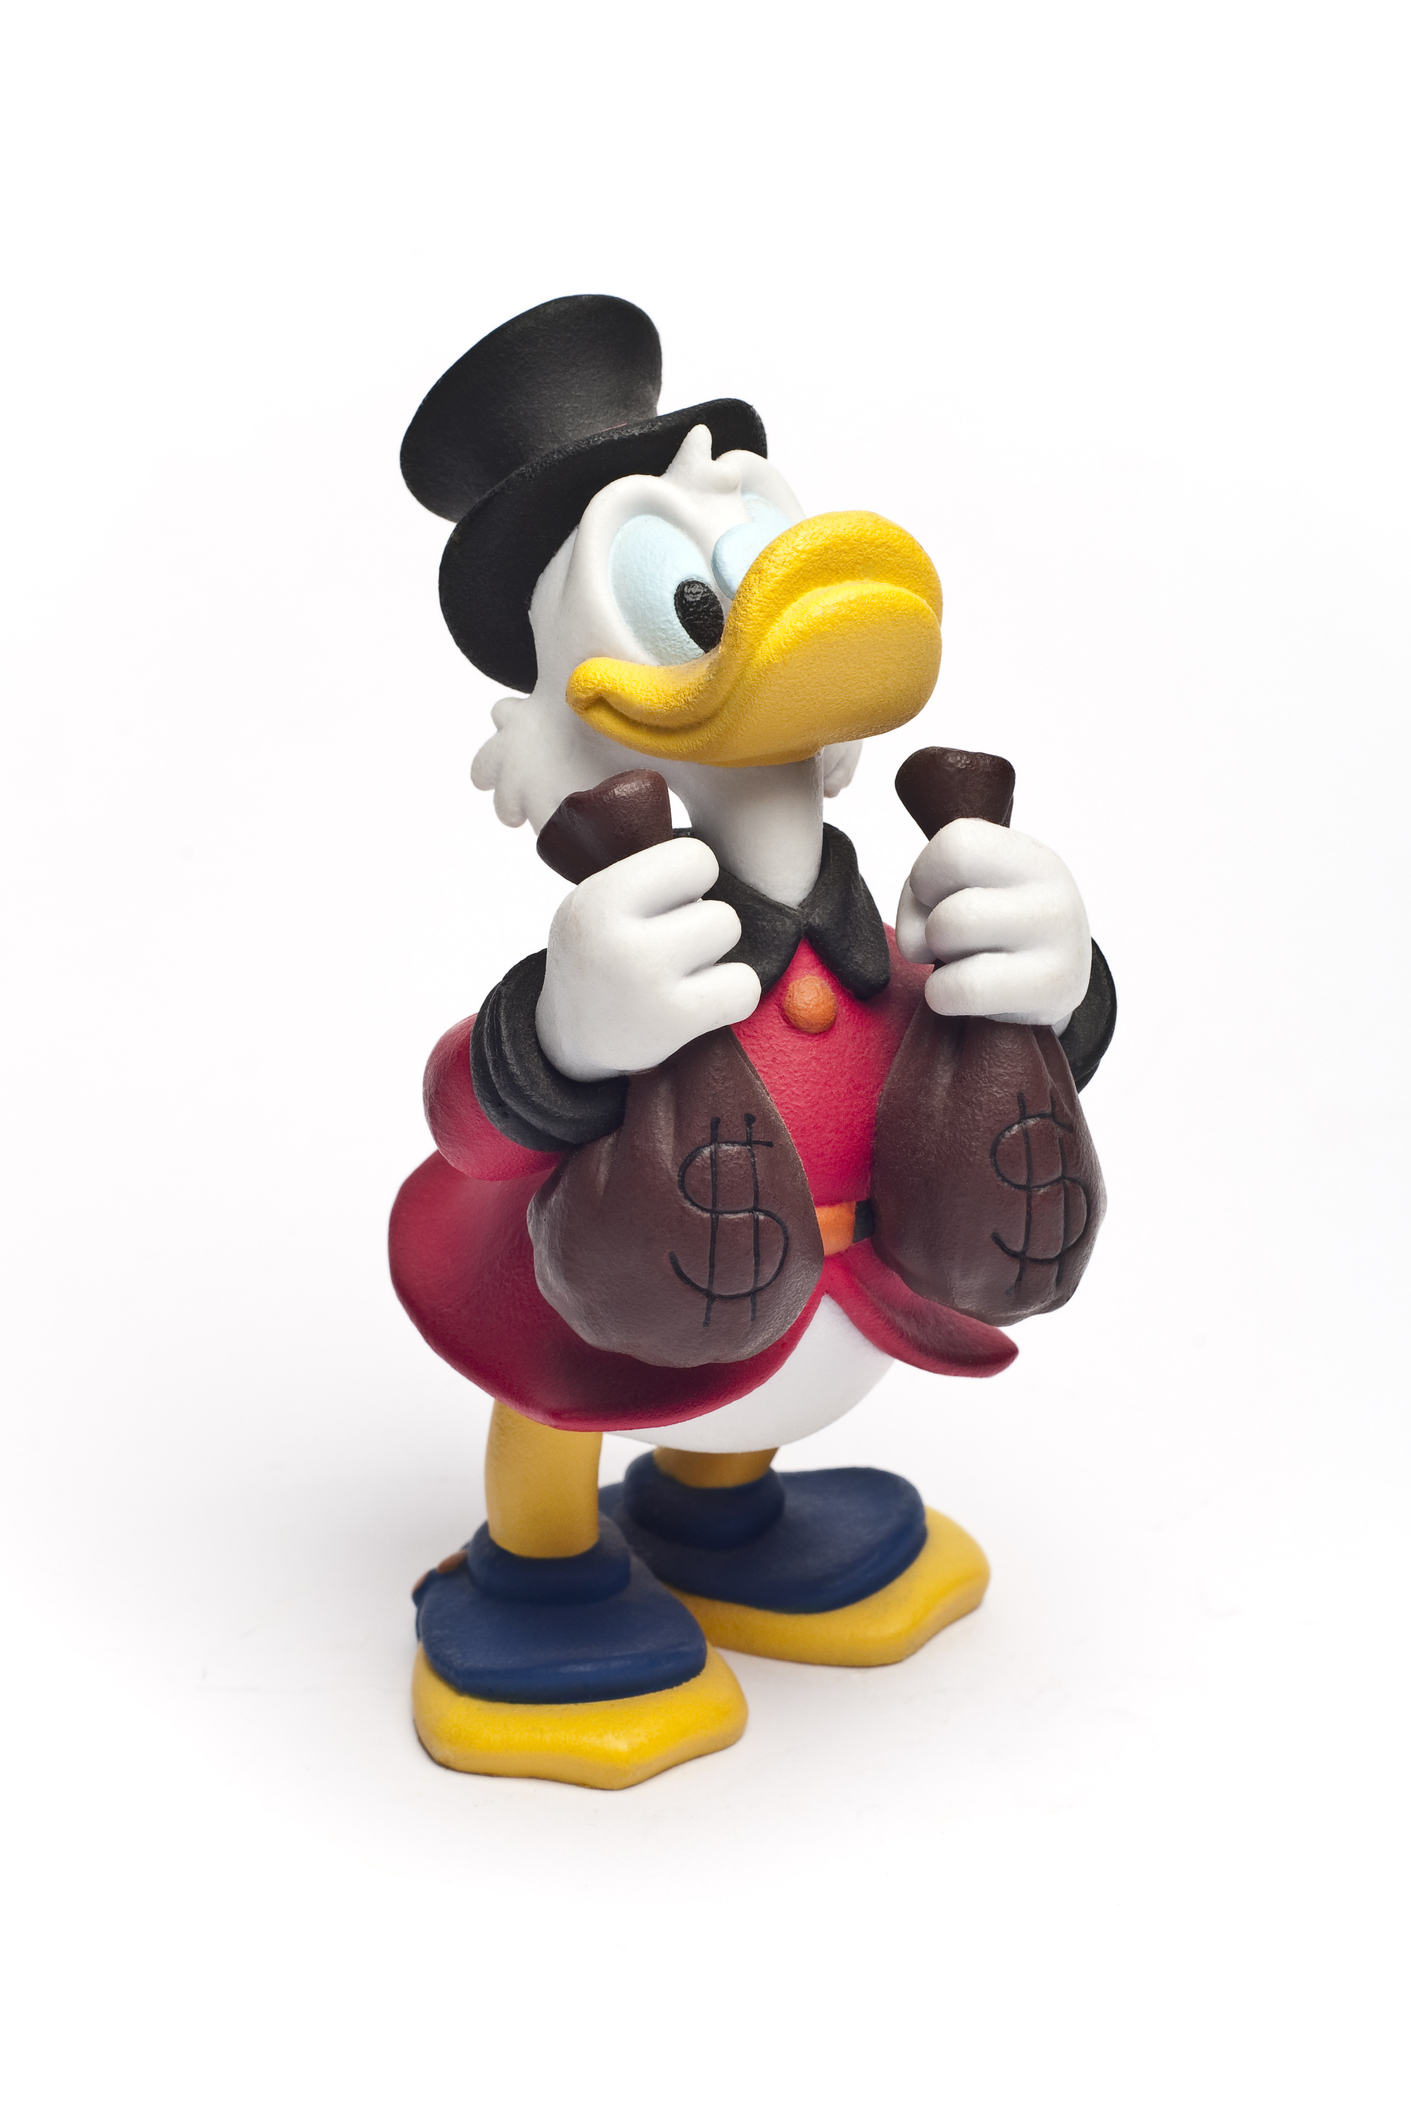 Scrooge McDuck with his money